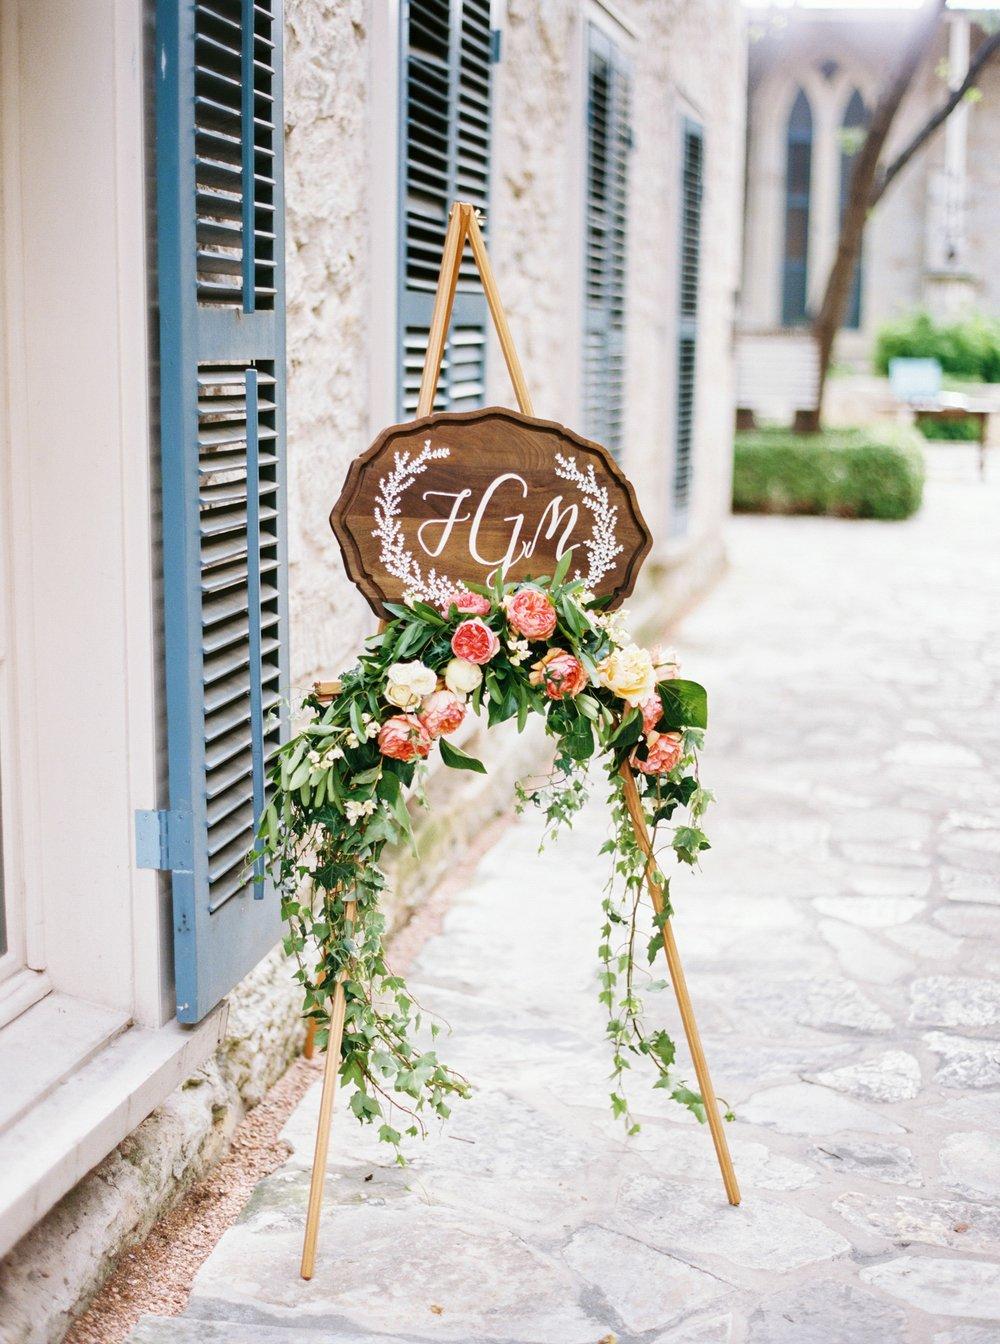 wooden sign featuring couple's monogram in white calligraphy is decorated with pink garden roses and eucalyptus